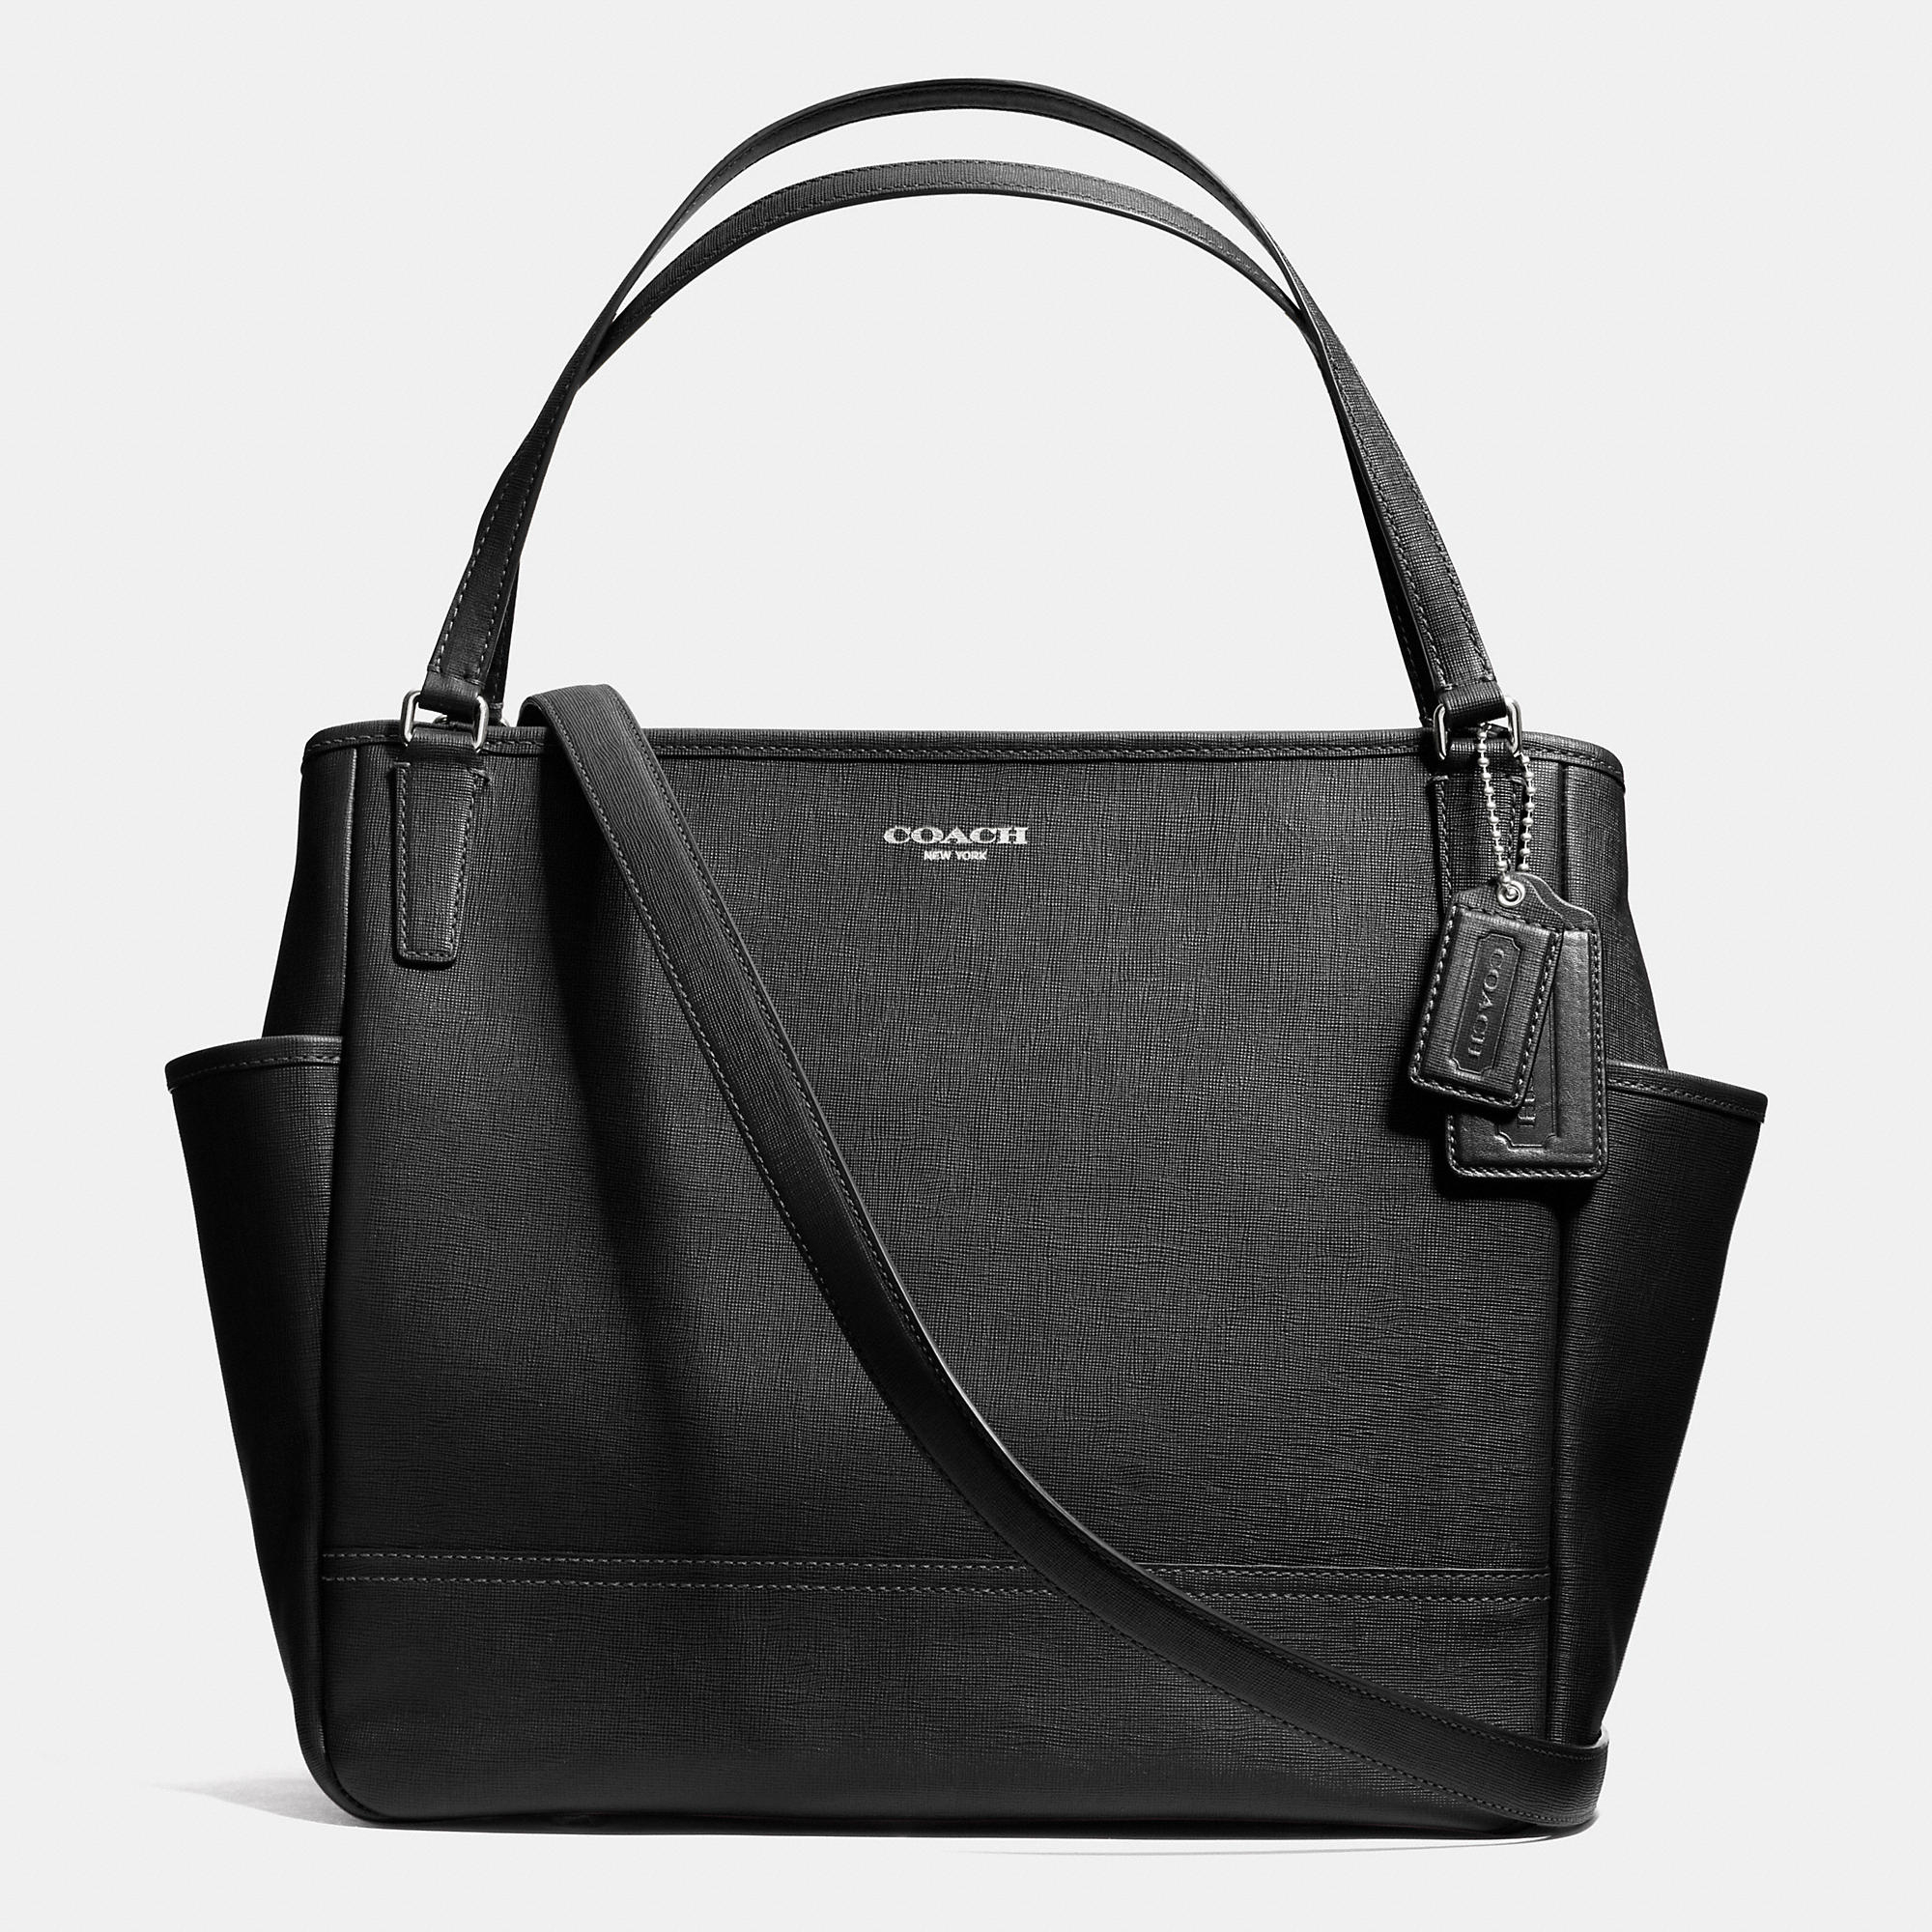 COACH Baby Bag Tote In Saffiano Leather in Silver/Black (Black) - Lyst